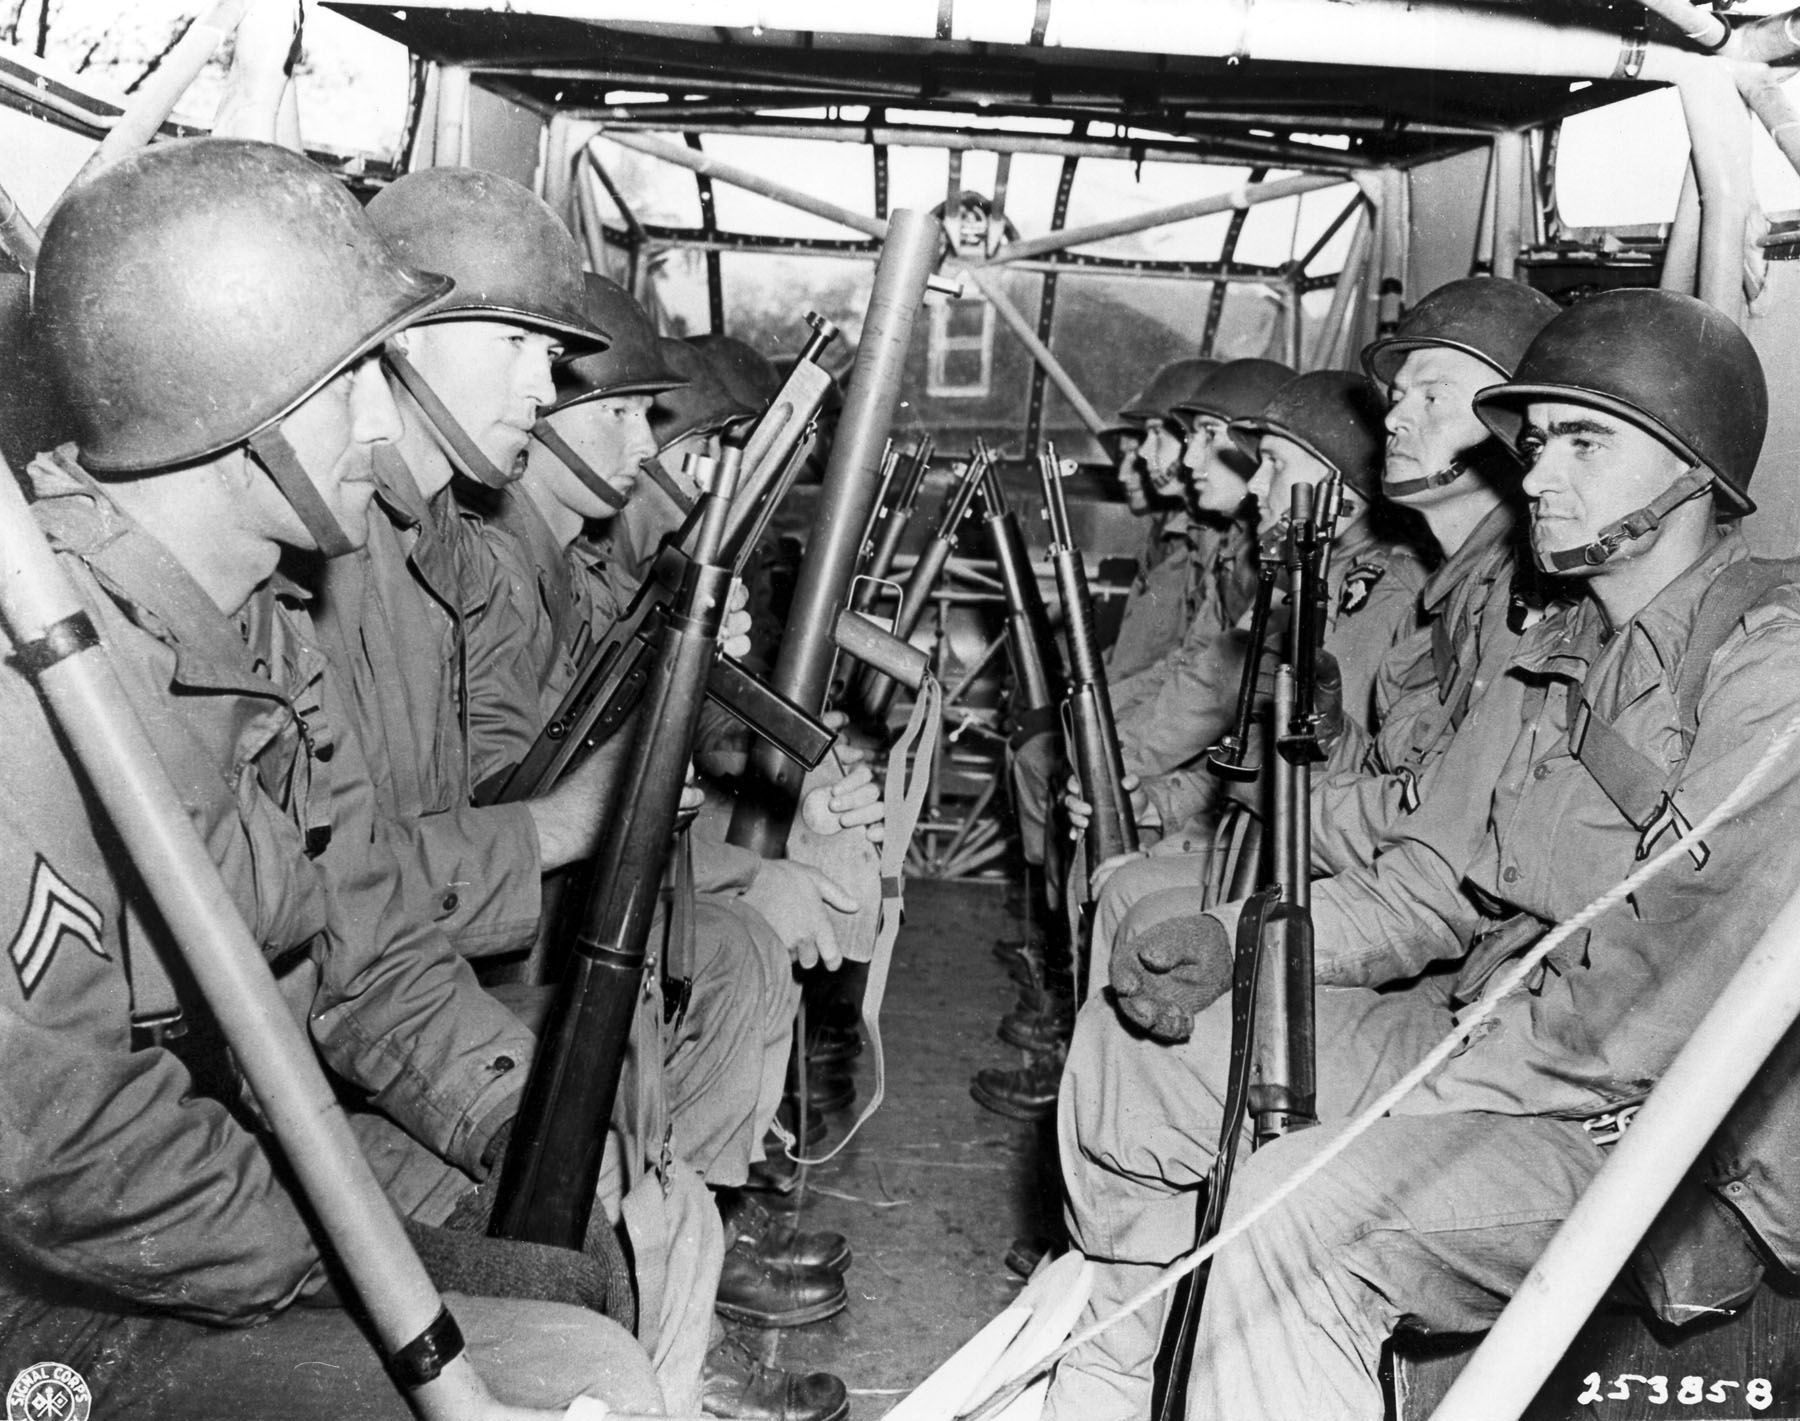 Waco CG-4 with US 101st Airborne men; note BAR, M1 Garand, Thompson M1A1, M1A1 Bazooka, Springfield 1903; possibly a training jump due to peeling PFC stripes; circa early 1944